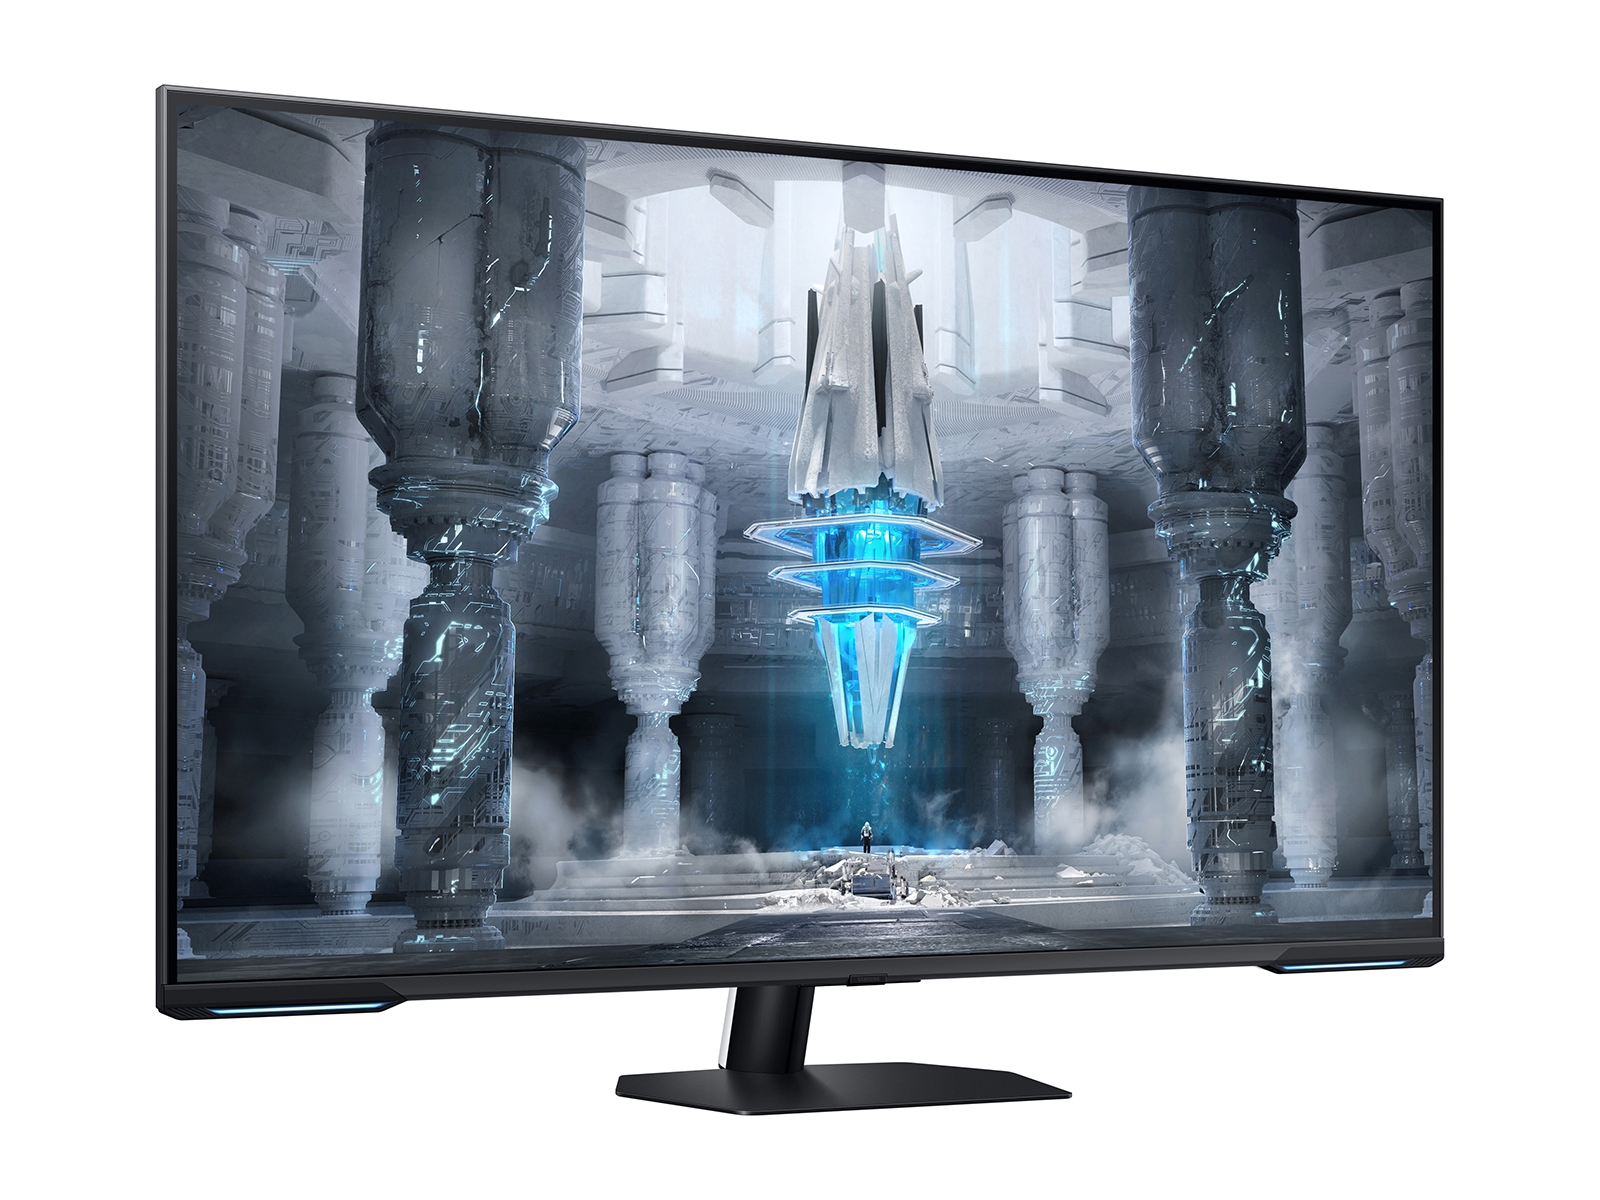 HP's 4K gaming monitor is ready for your PS5 or Xbox Series X